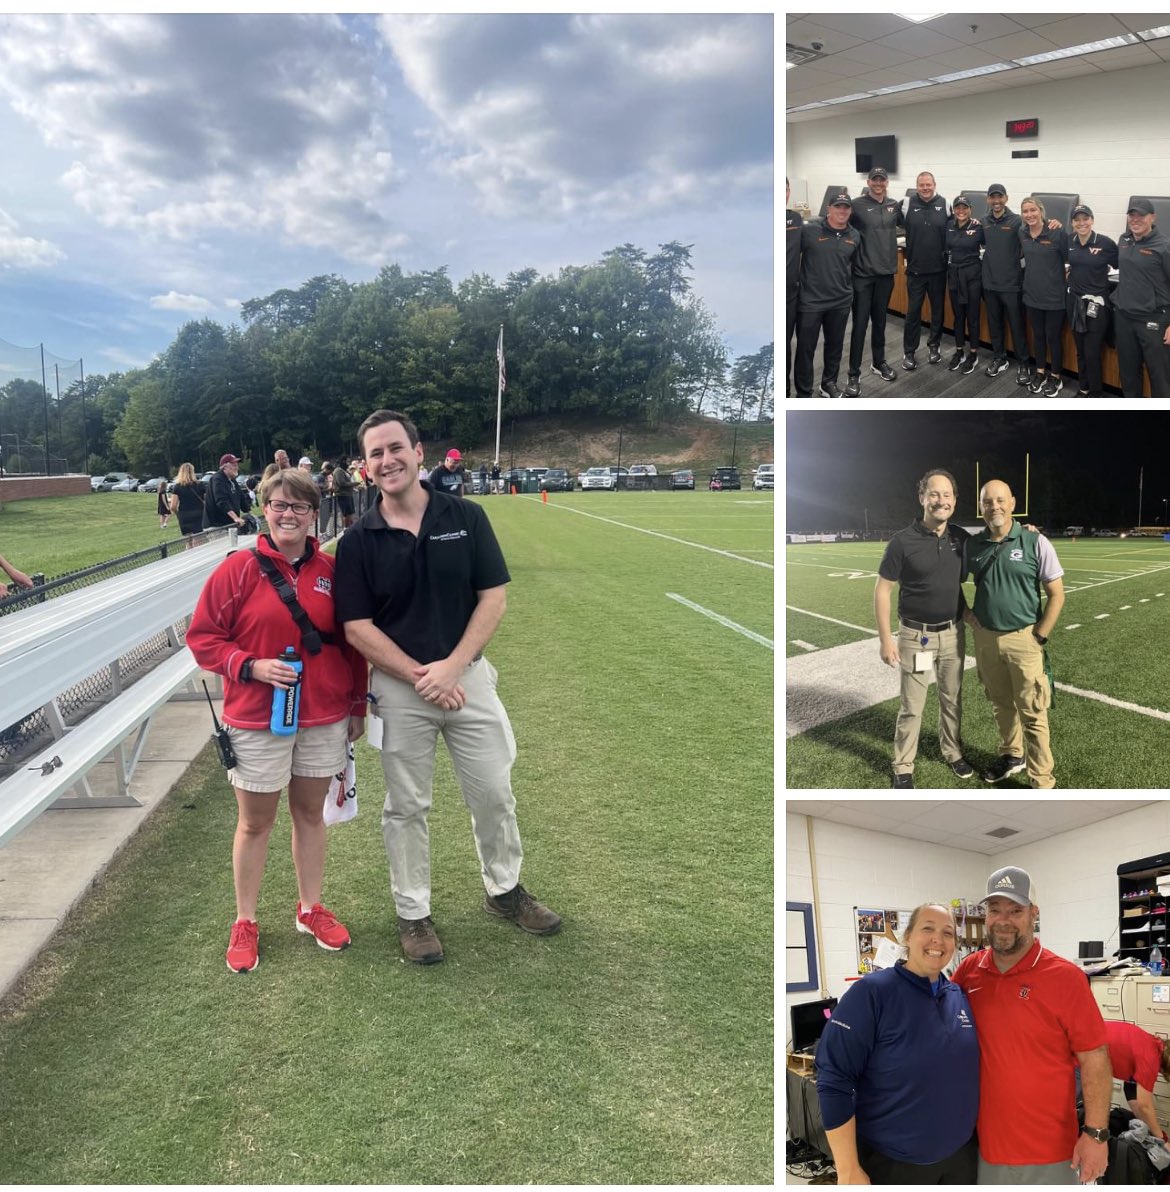 The next time you're at a college or high school football game, you may see our sports medicine team on the sidelines helping to keep student athletes safe. Our certified athletic trainers and doctors provide game-day care as well as on-site care during the week to help athletes